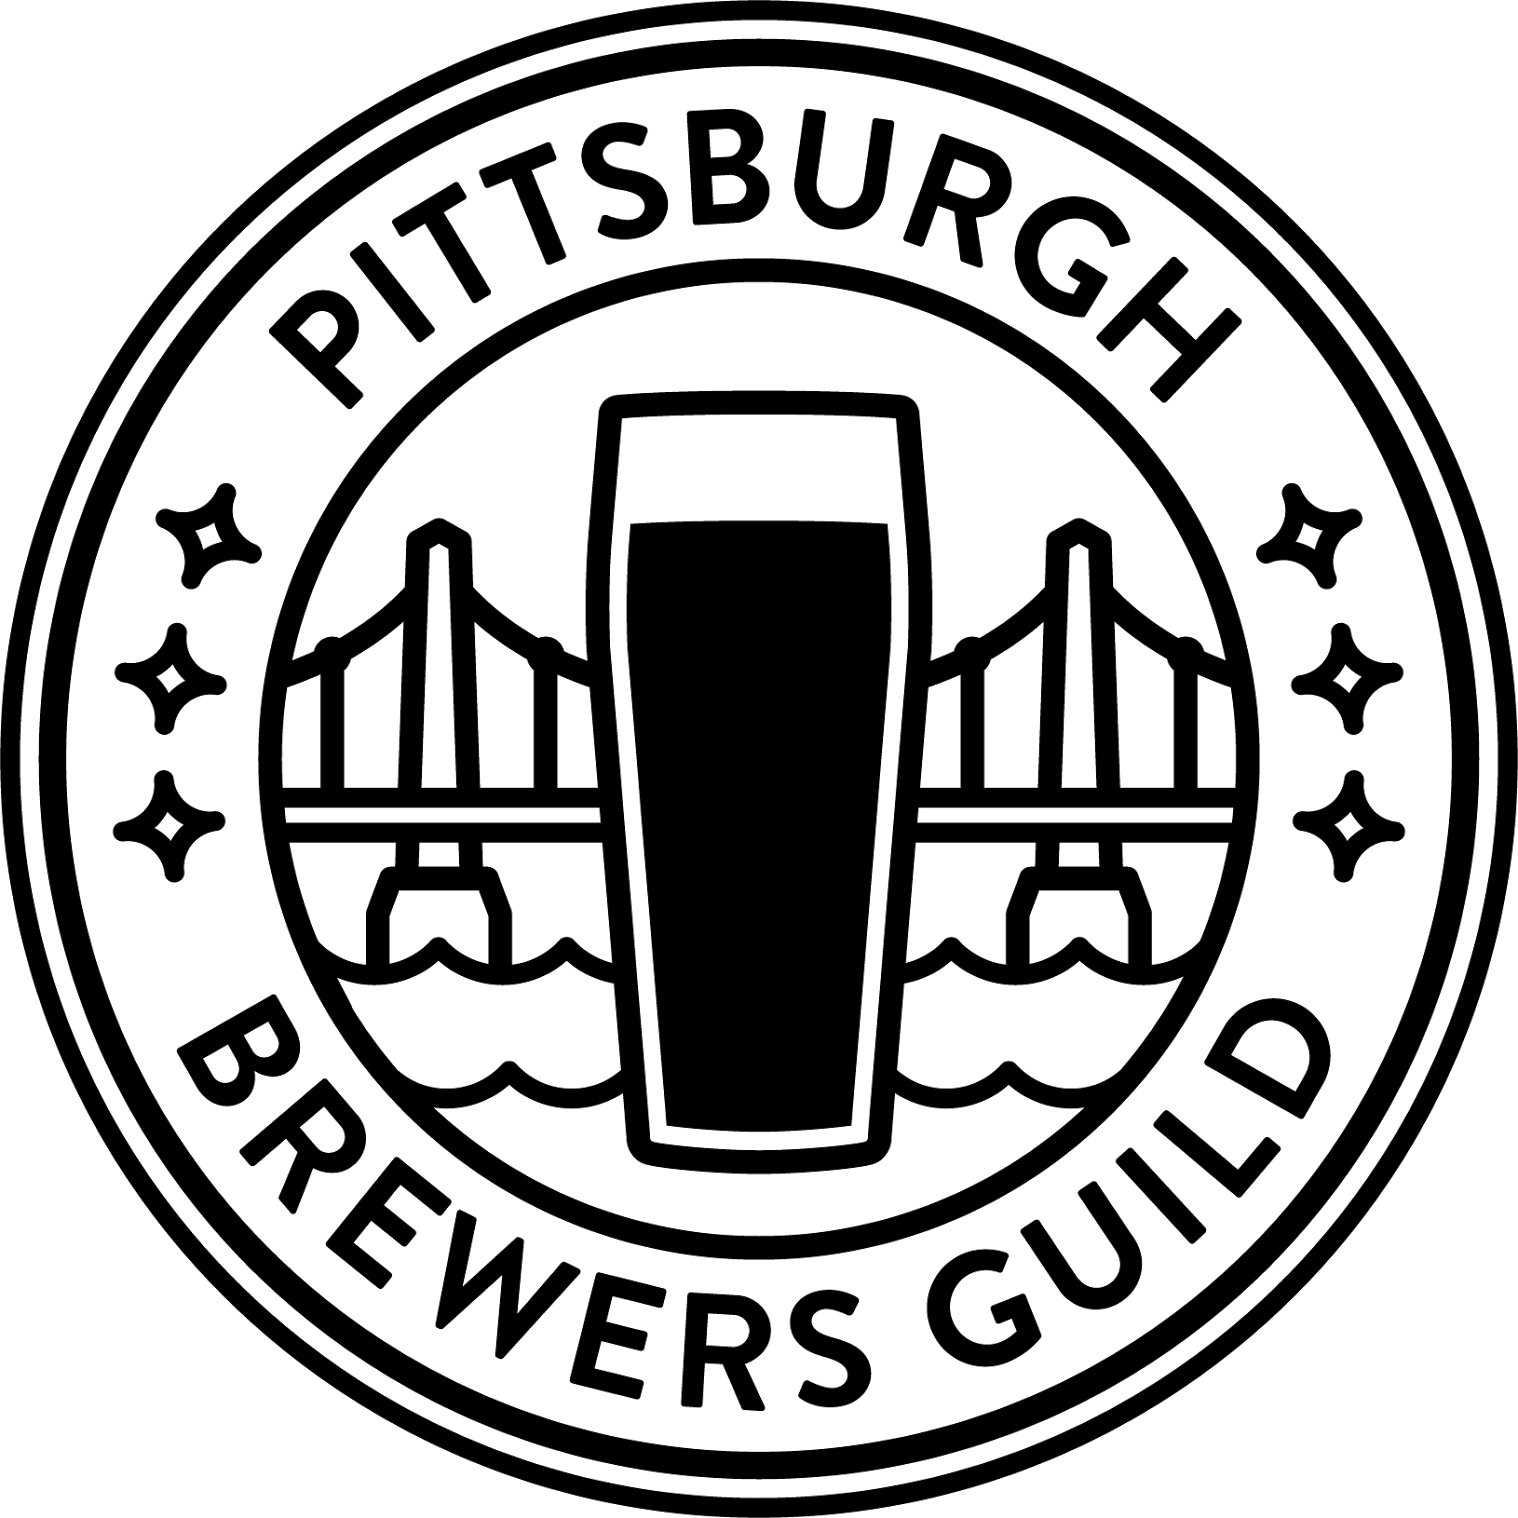 A united voice for Independent Craft Breweries in Allegheny County.